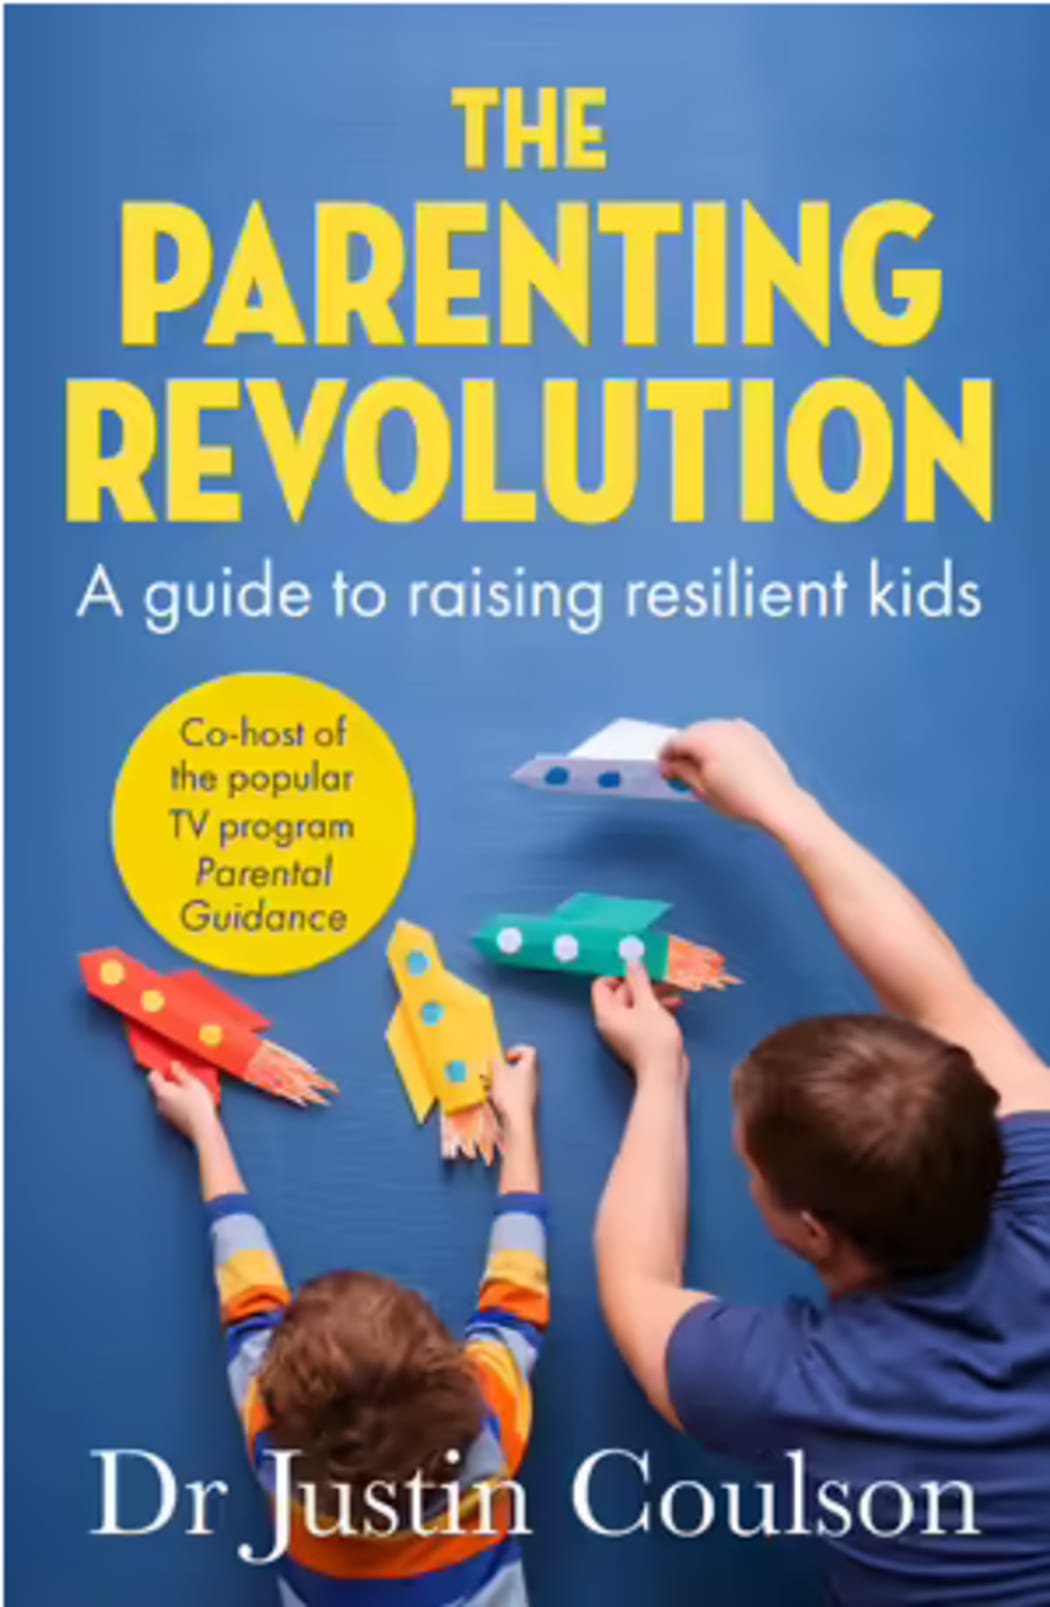 The Parenting Revoluation book cover